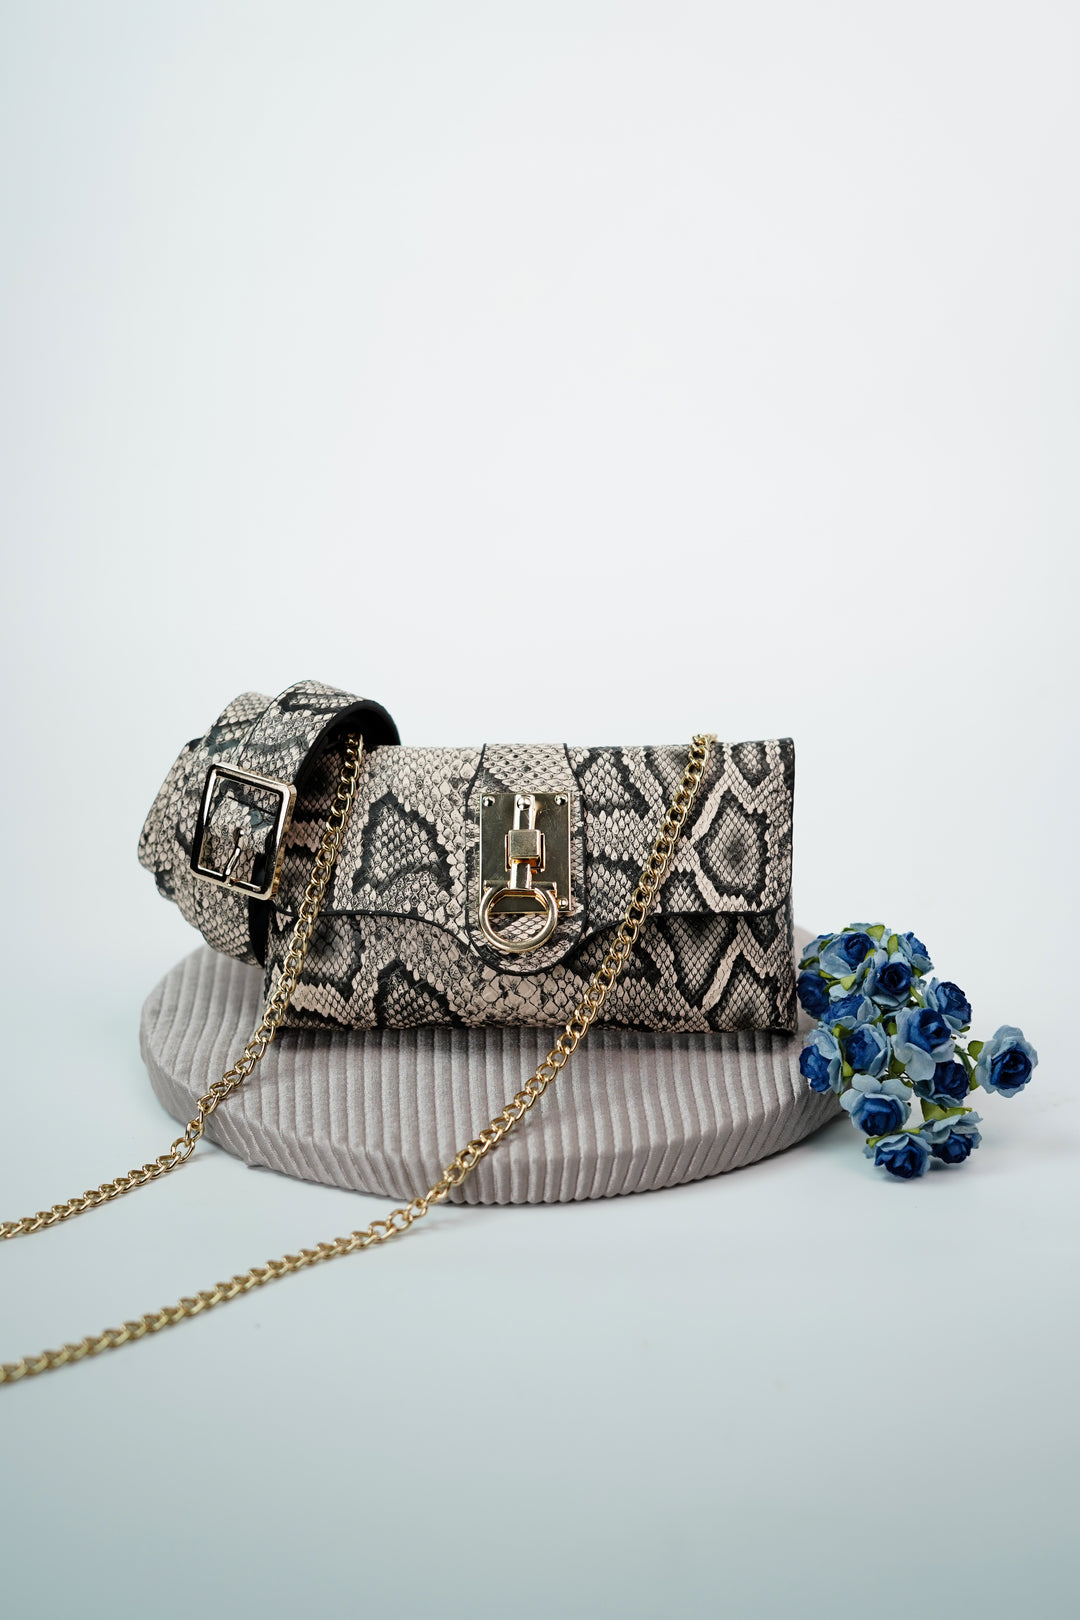 Fashionably Crafted Python-Inspired Waist Pouch for Modern Edge